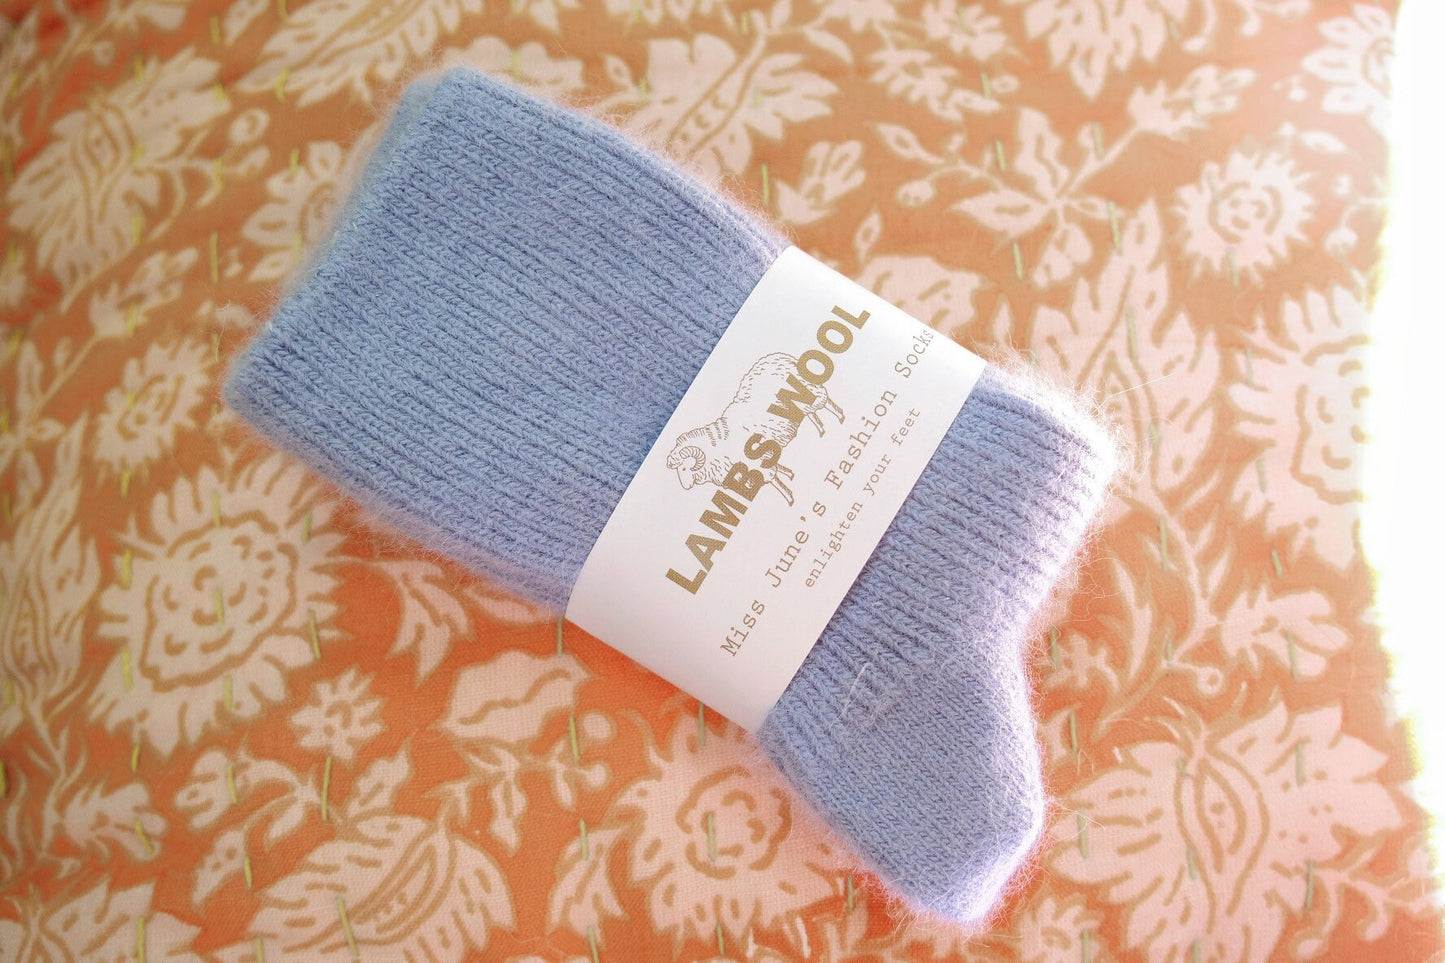 Miss June’s| 1 Pair  Cashmere Wool blended socks|Size5–7 | winter| Warm | Soft | High quality| Gift idea | Thanksgiving |women’s socks| Cozy